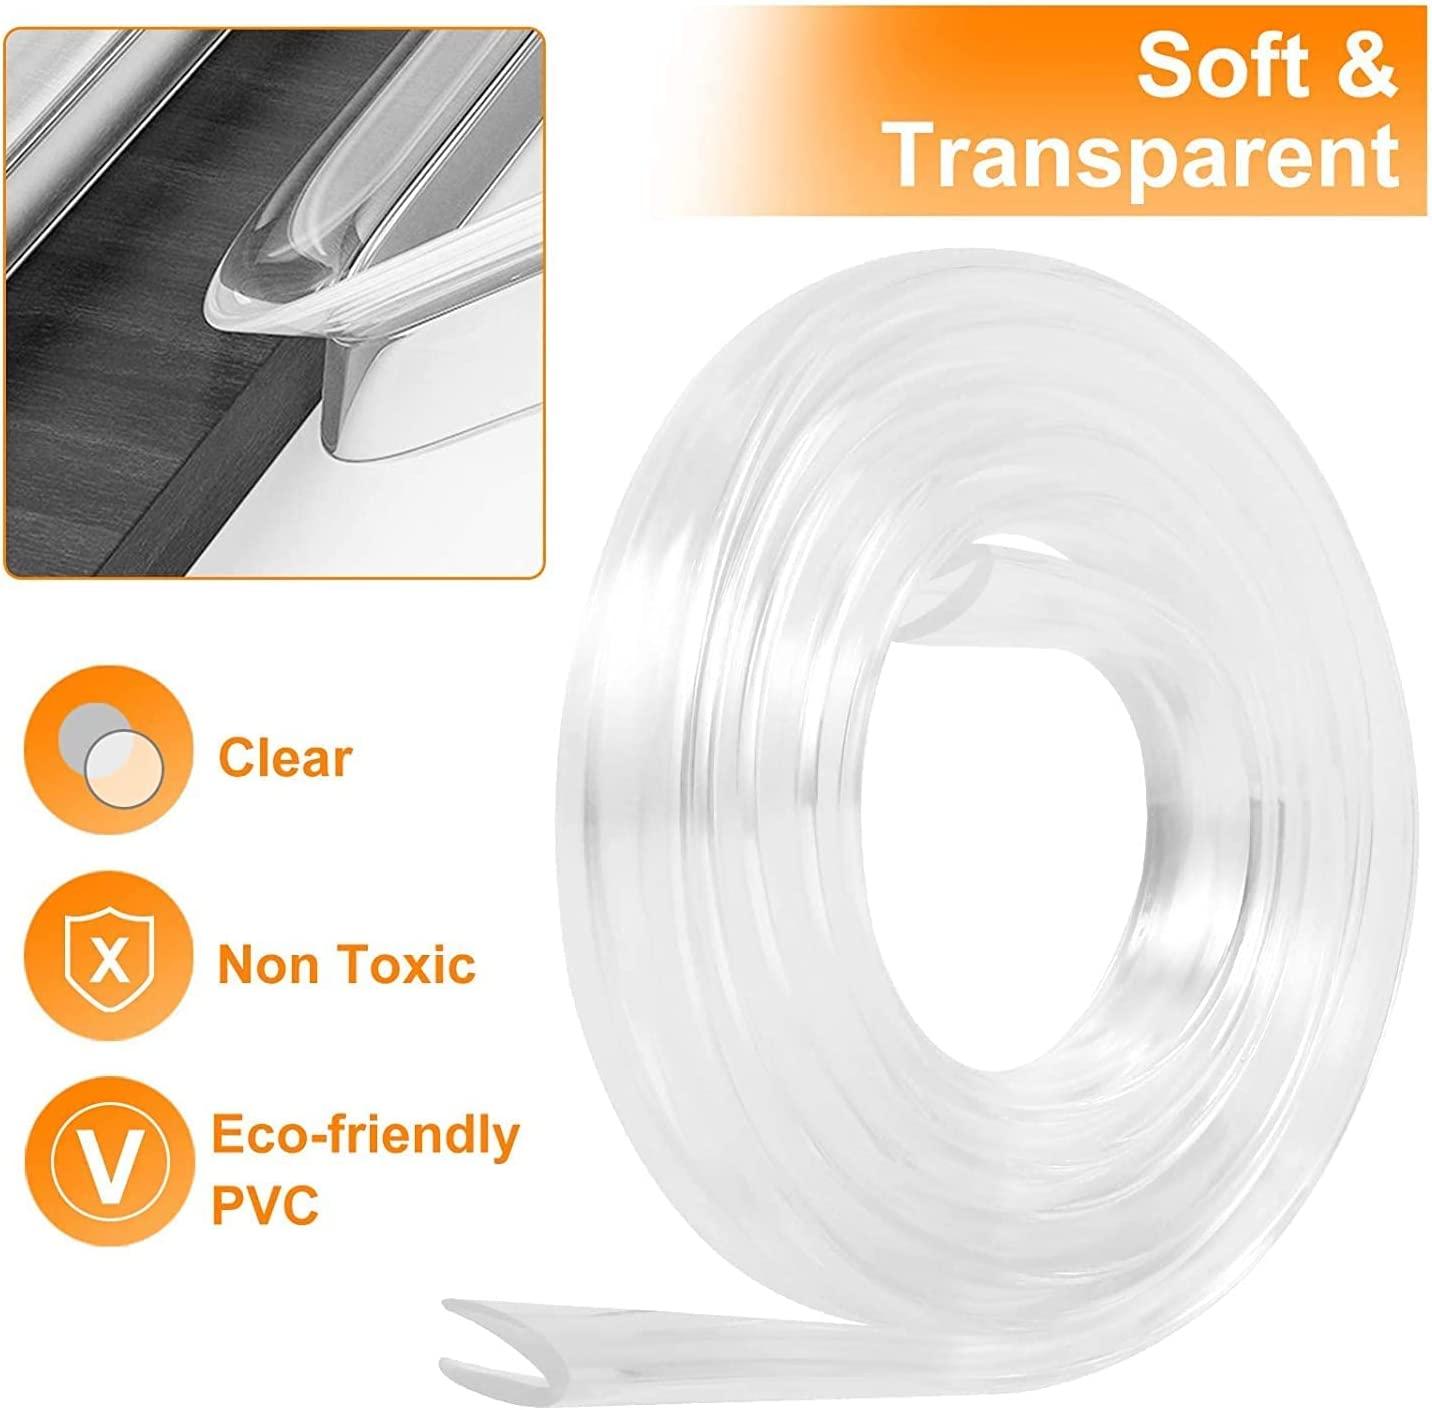 Corner Protectors Strip Clear Transparent, E-PRONSE 6M/20FT Furniture Table  Edge Protectors Soft Silicone Bumper Strip with 14M Strong Adhesive Tape  for for Cabinets, Tables, Drawers 6m 10mm